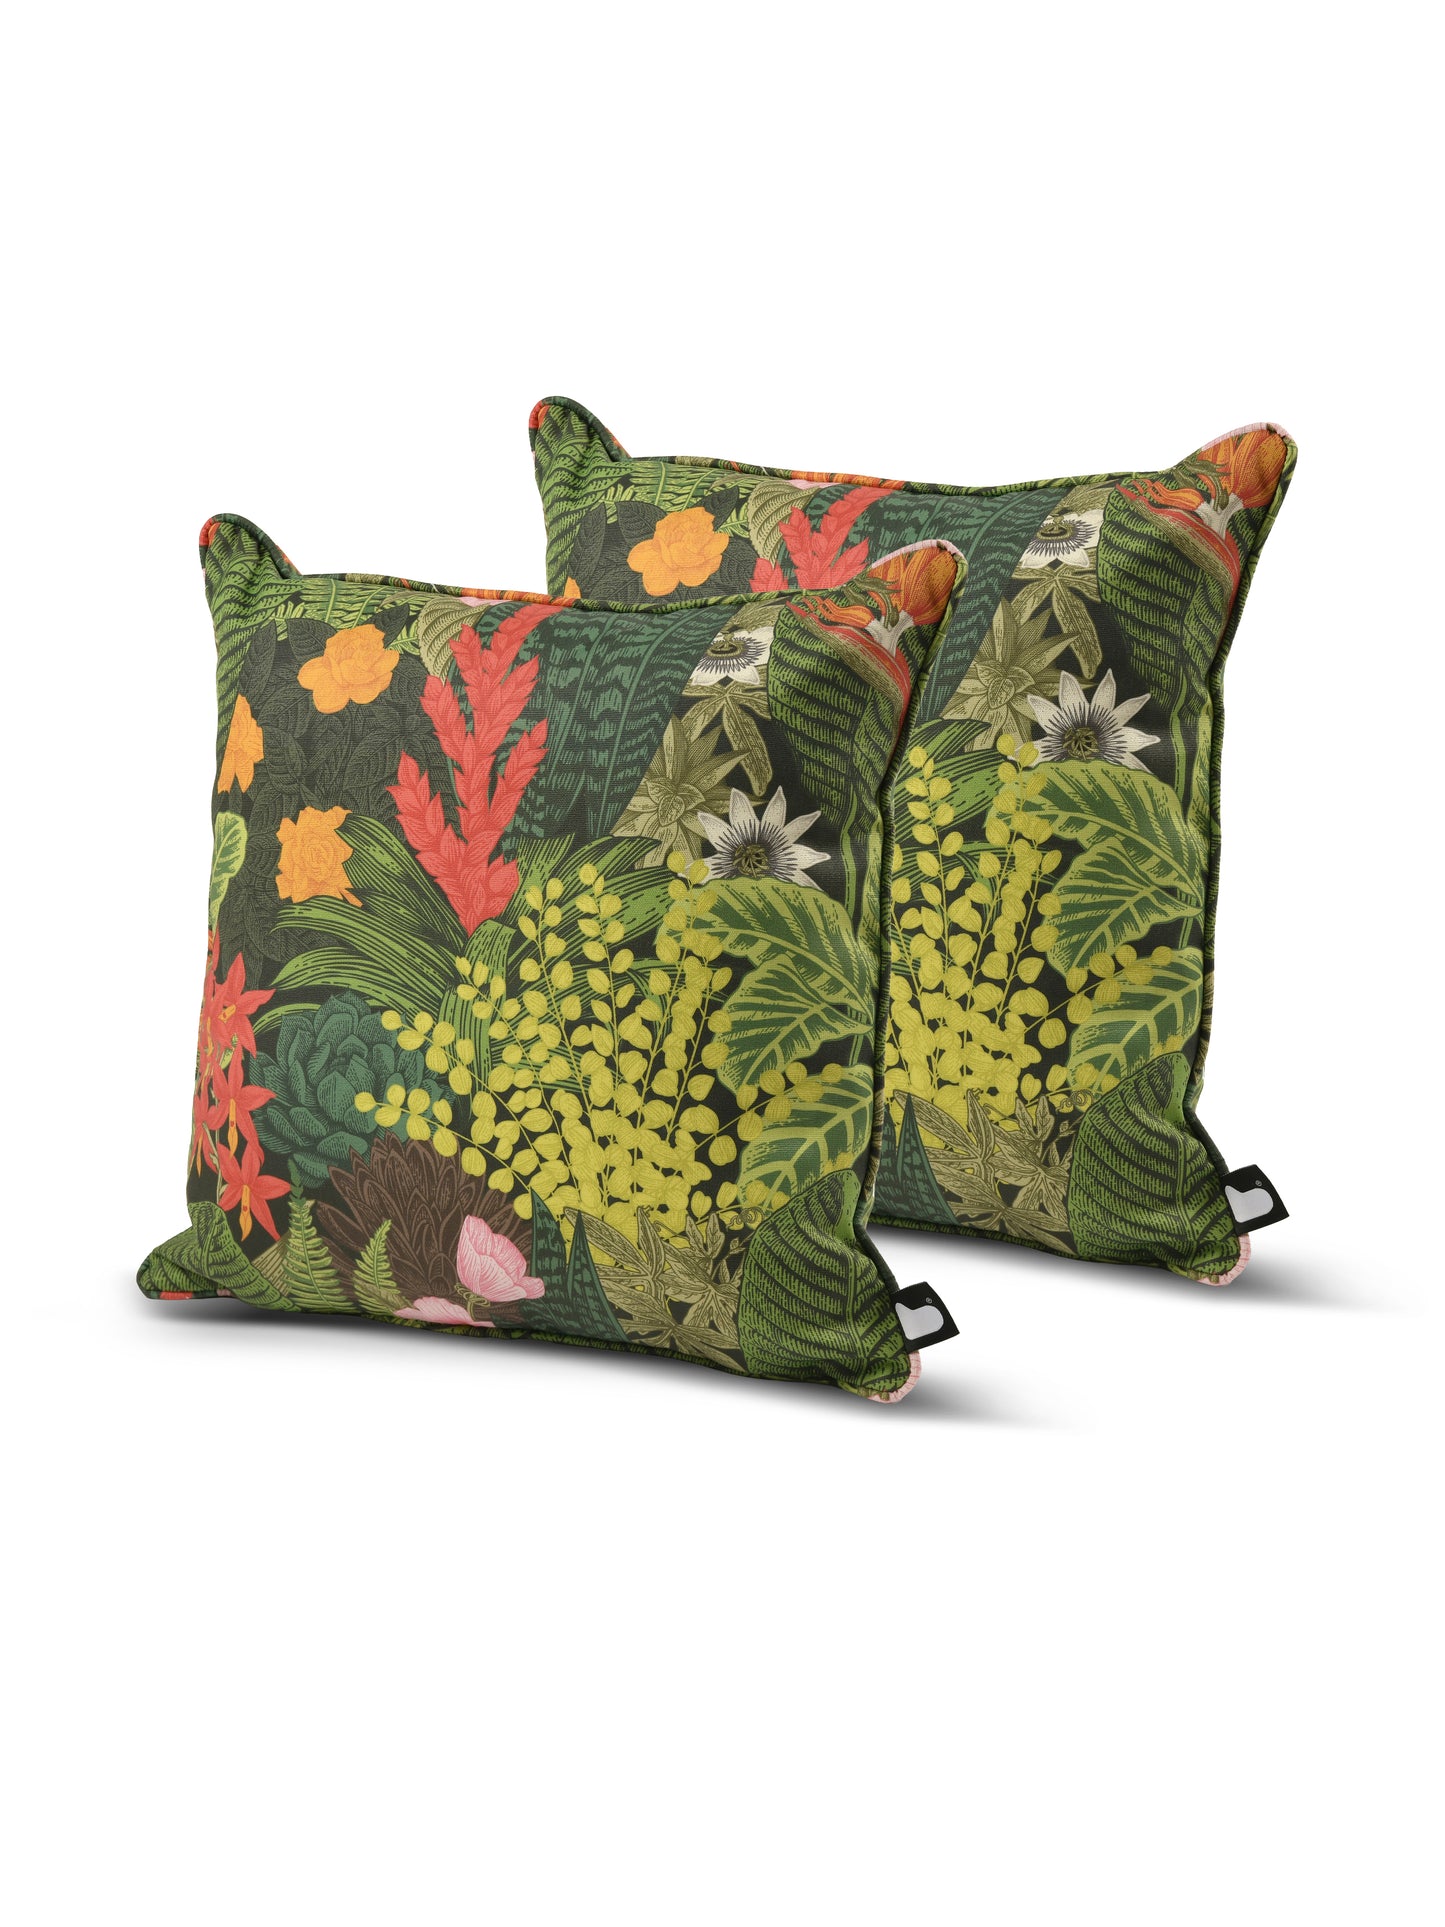 Two square B Cushion Twin Pack Art Collection by Brisks with a vibrant botanical pattern. The design features various shades of green leaves, yellow abaca fibers, and orange and red tropical flowers set against a dark background. Made from splash-proof fabric, the cushions also have small black loops on the sides for attachment.